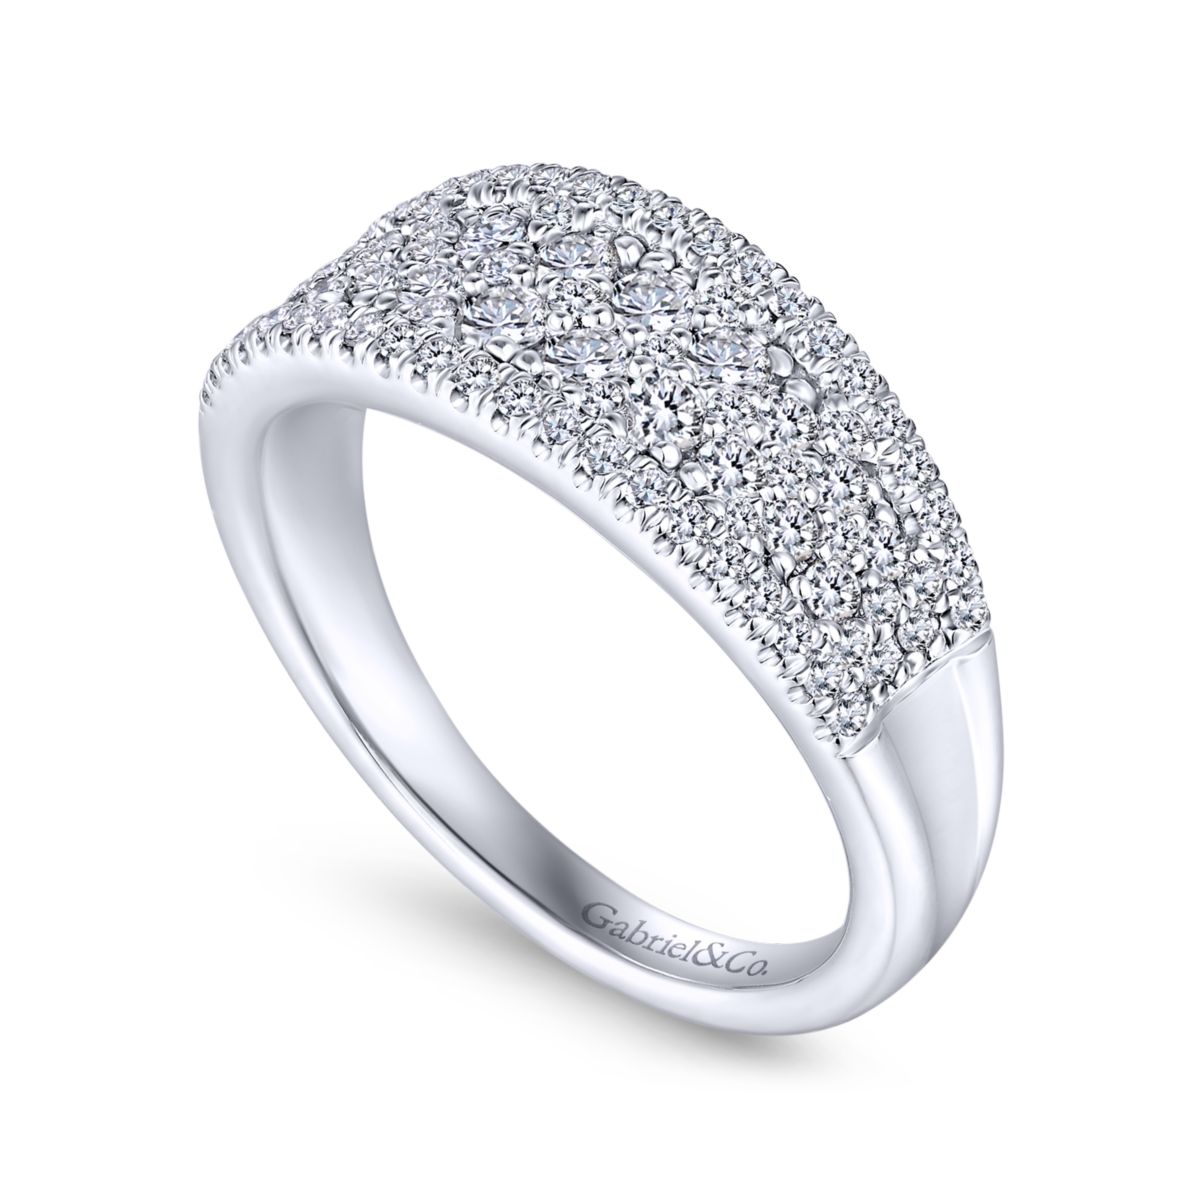 Curved Pave Mixed Diamonds Ring in 14k White Gold - Angle